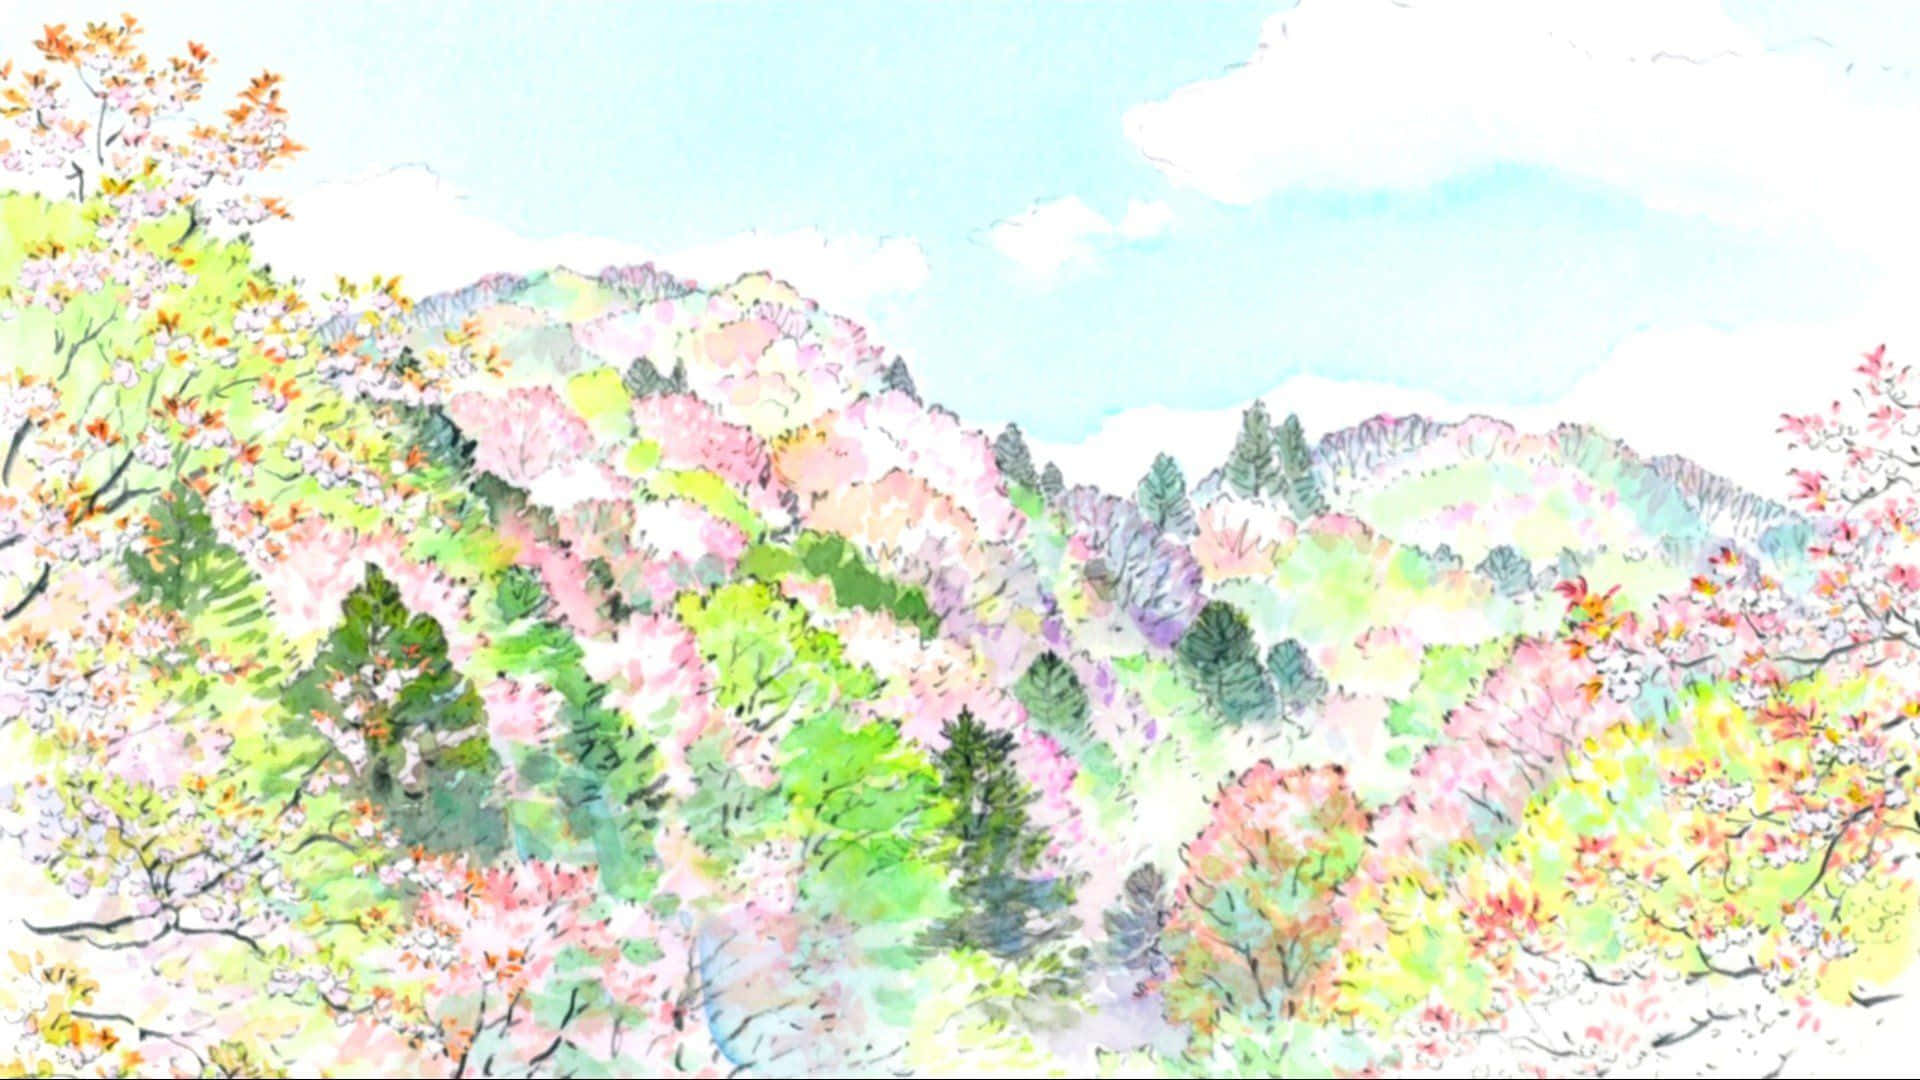 The Tale of the Princess Kaguya – A captivating scene from the animated film Wallpaper